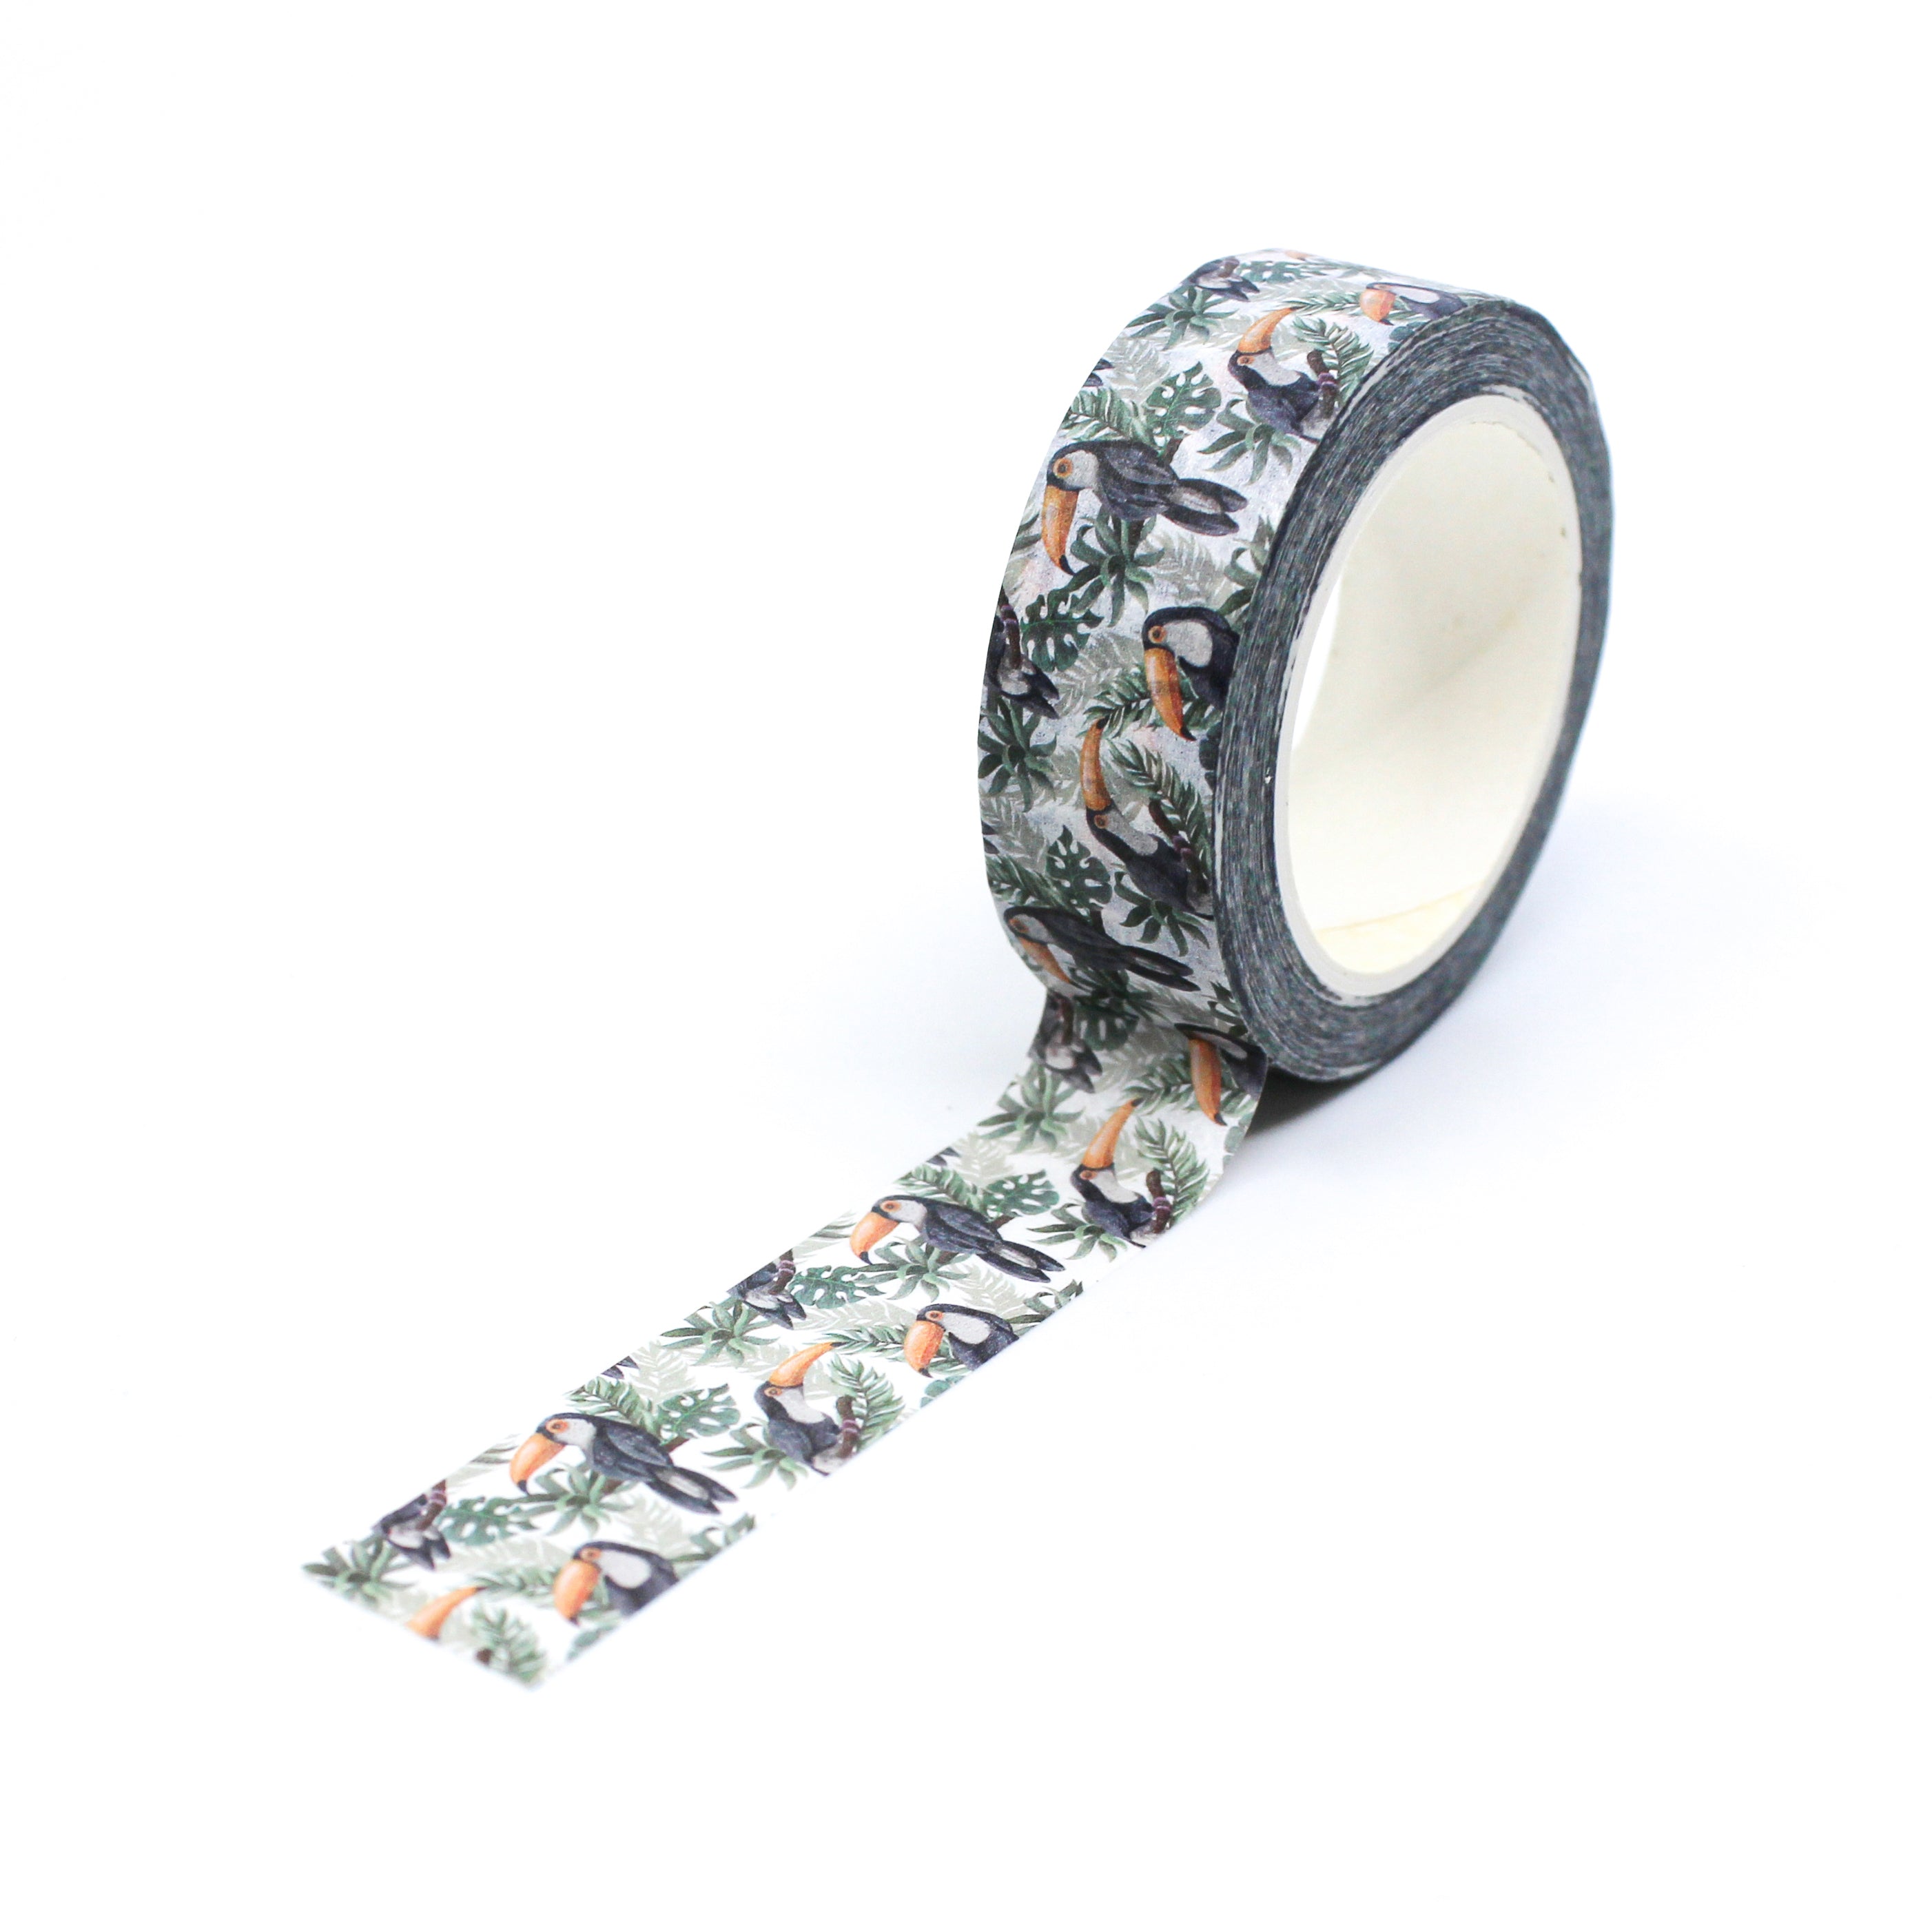 This is a full pattern repeat view of tropical birds washi tape from BBB Supplies Craft Shop